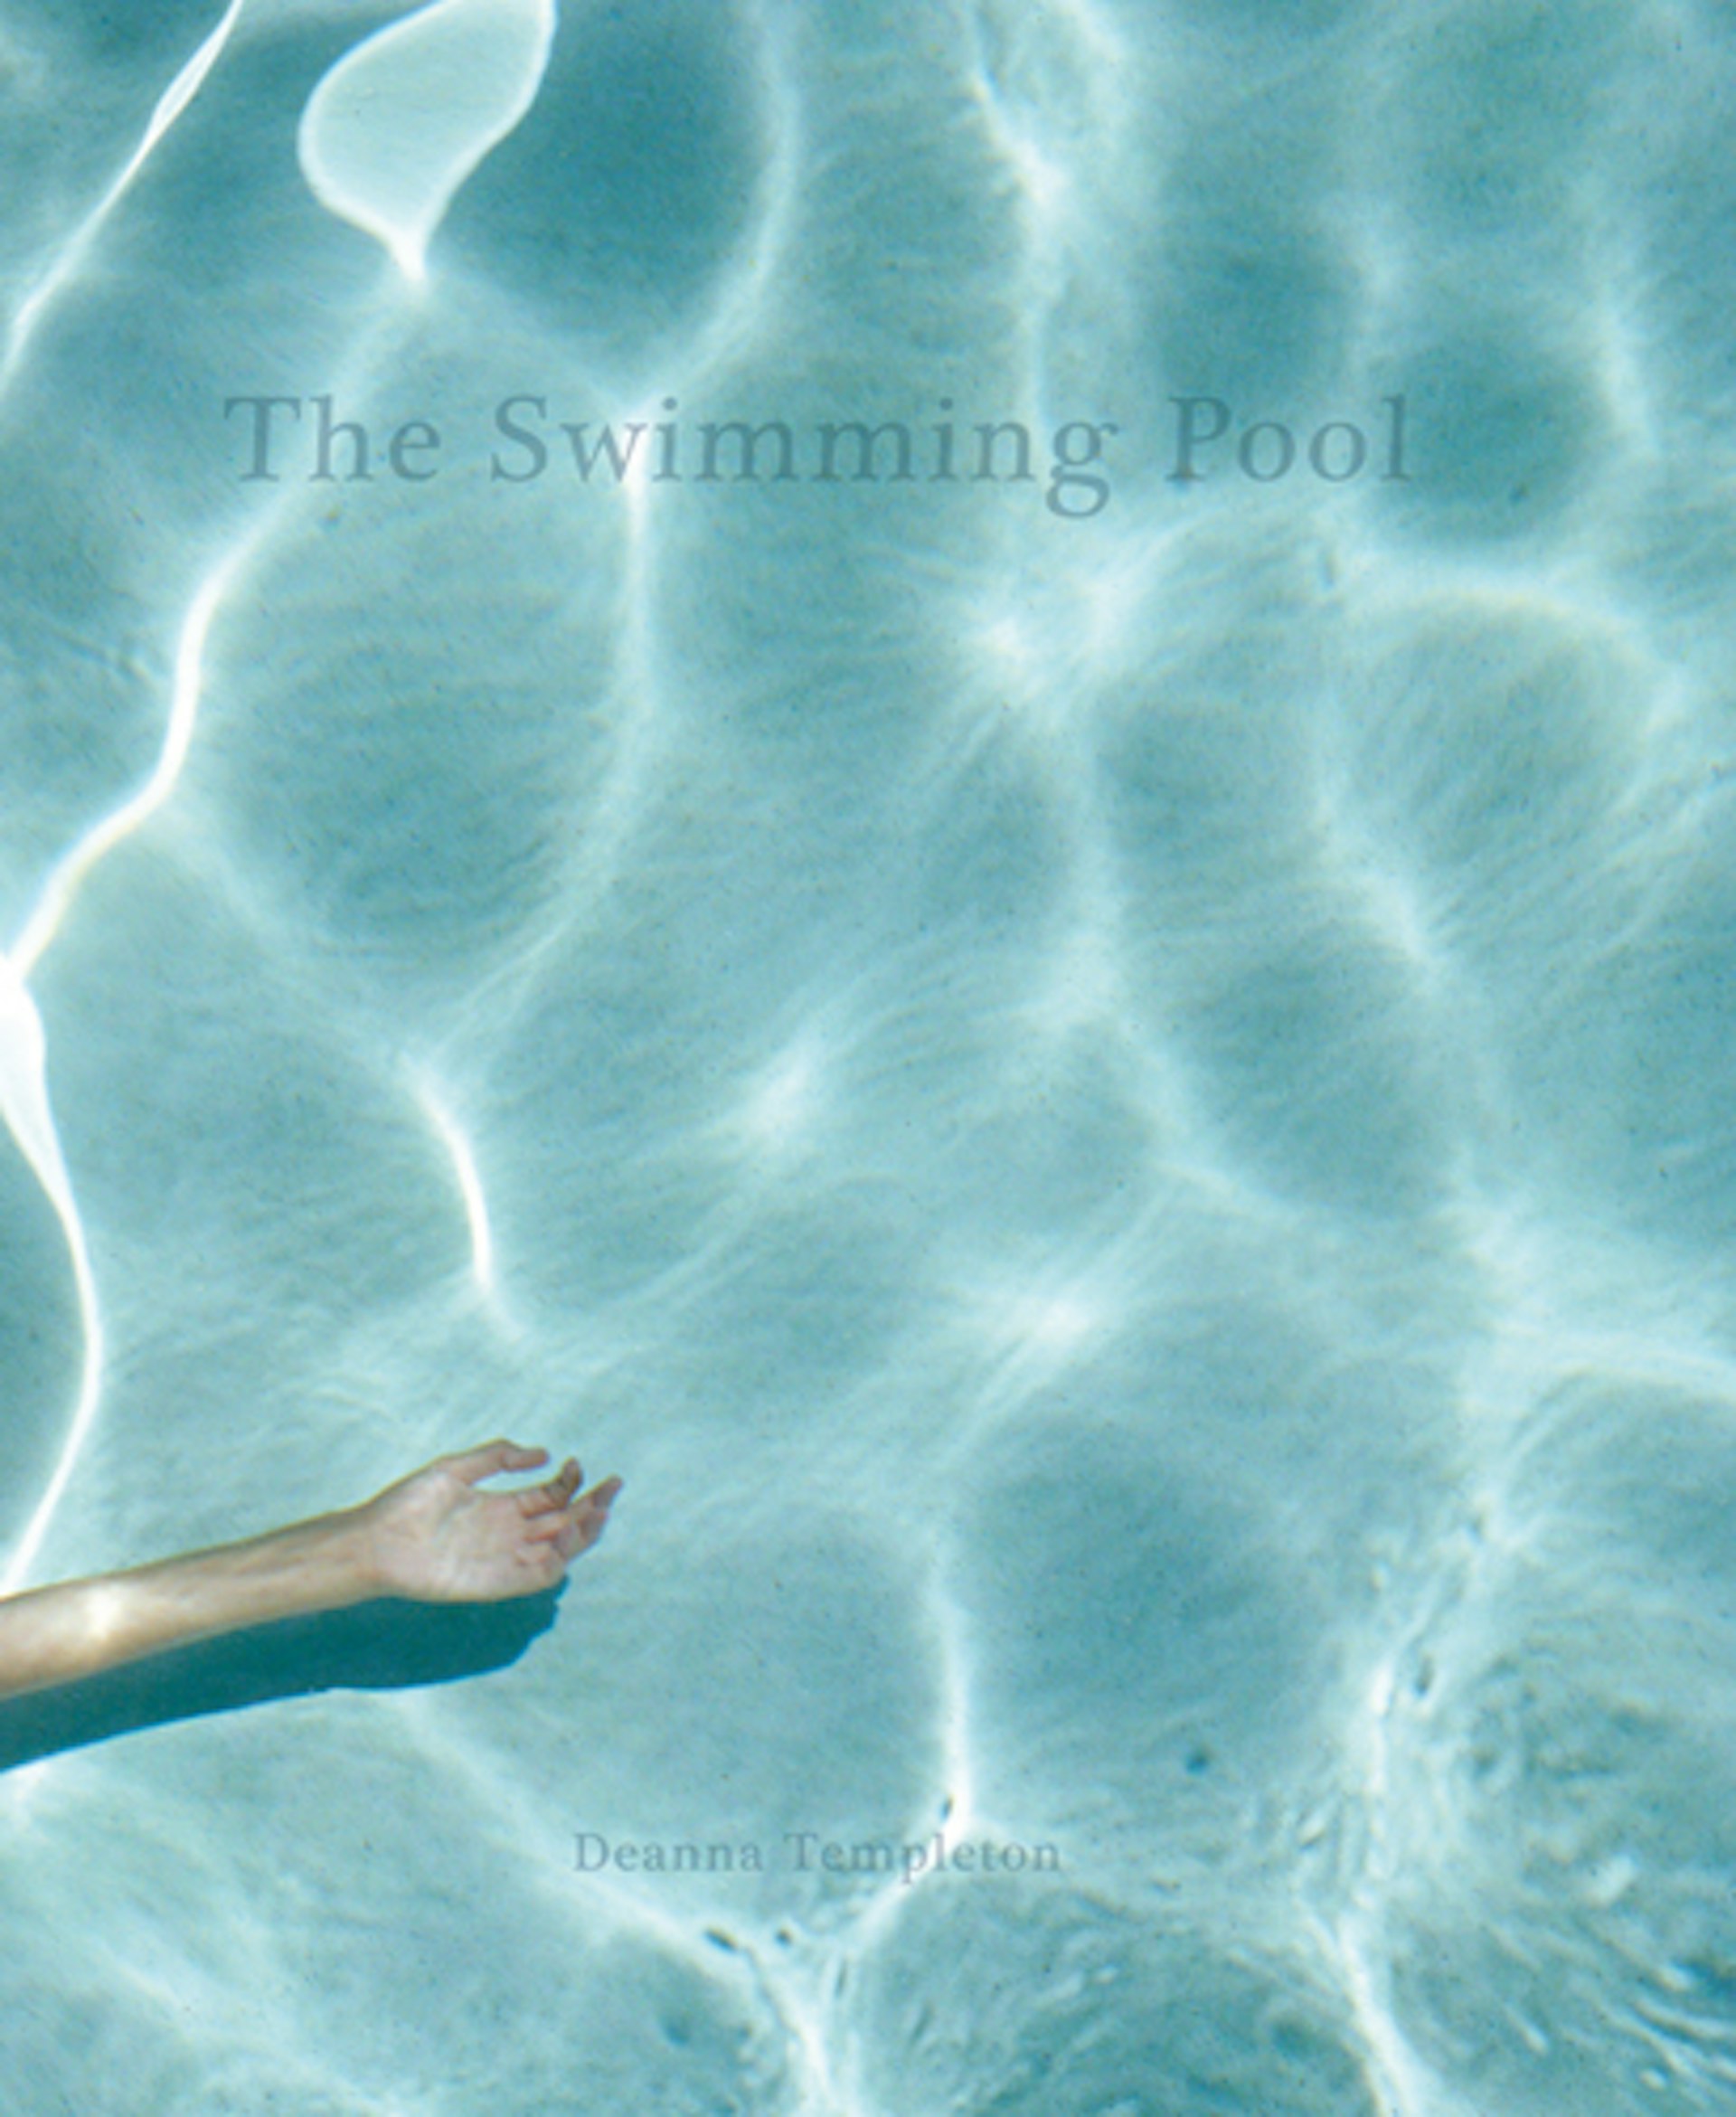 deanna-templeton-the-swimming-pool-1